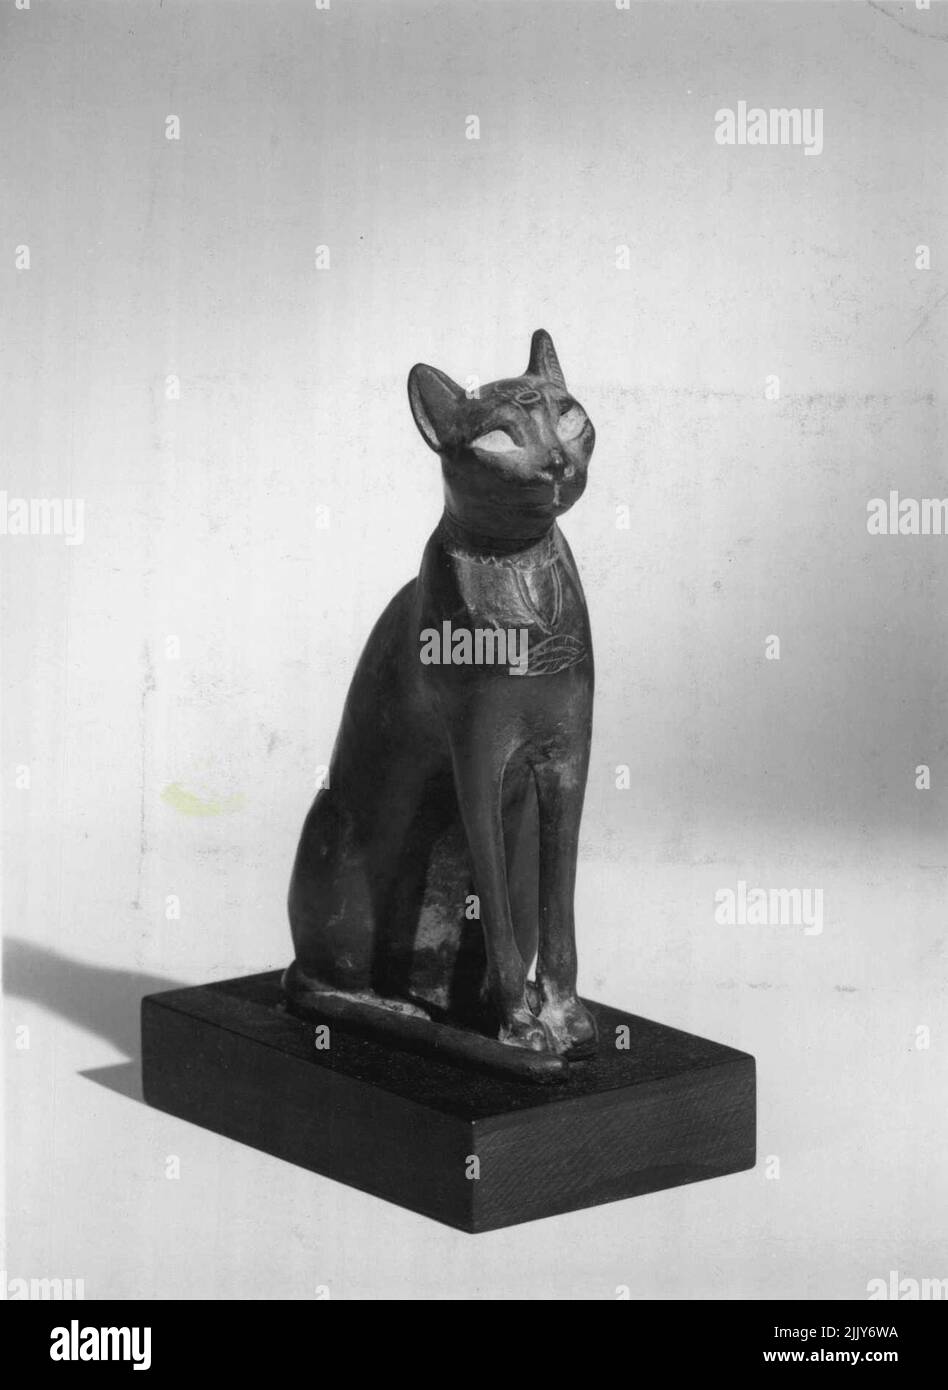 Cast -- Cat, scared to the goddess Bastet Bronze, Egyptian, late Dynastic Period, about 600-300 B.C. Height 7 inches Price $10,00, mailing charge 75 cents. June 1, 1952. (Photo by The Metropolitan Museum Of Art). Stock Photo